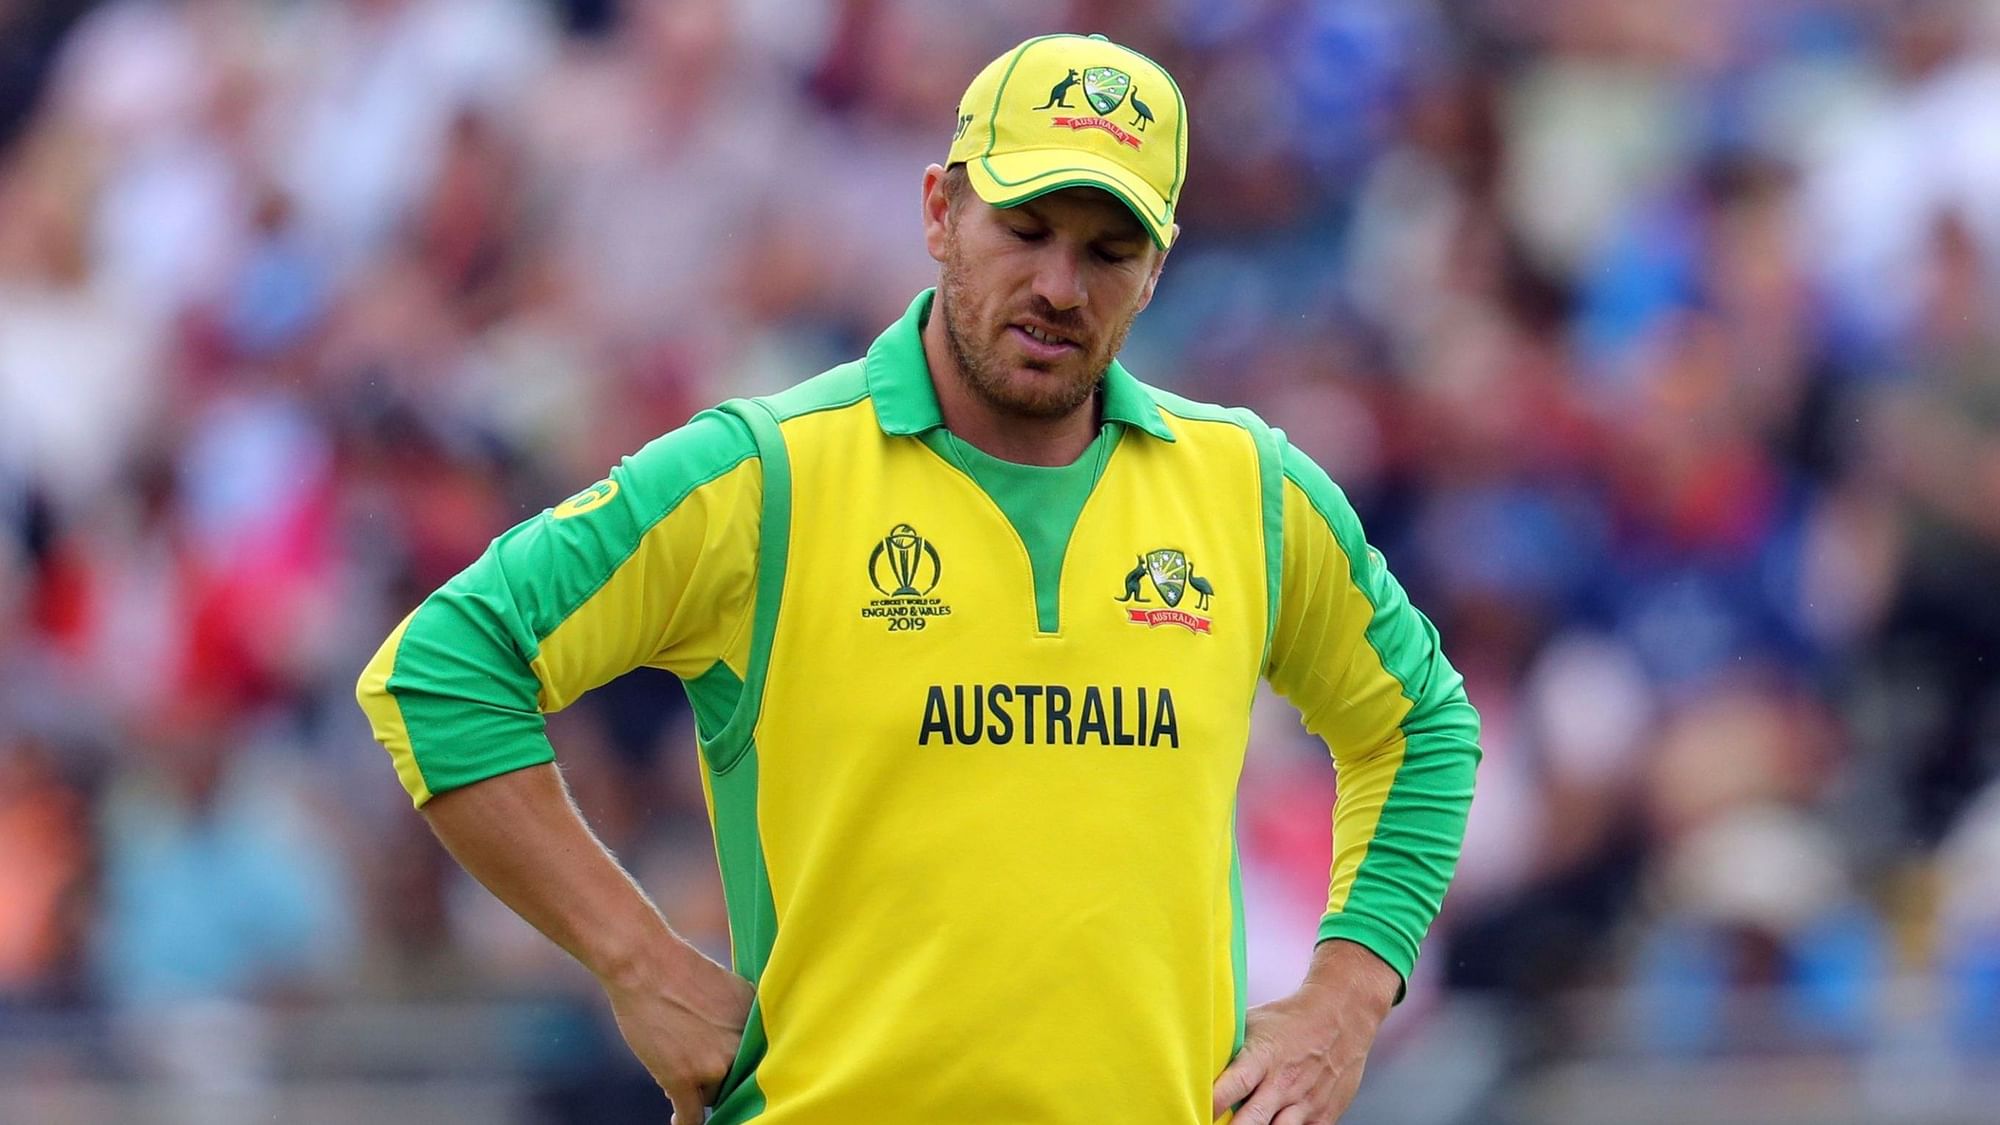 Australian skipper Aaron Finch had no qualms in admitting that his team had been completely outplayed.